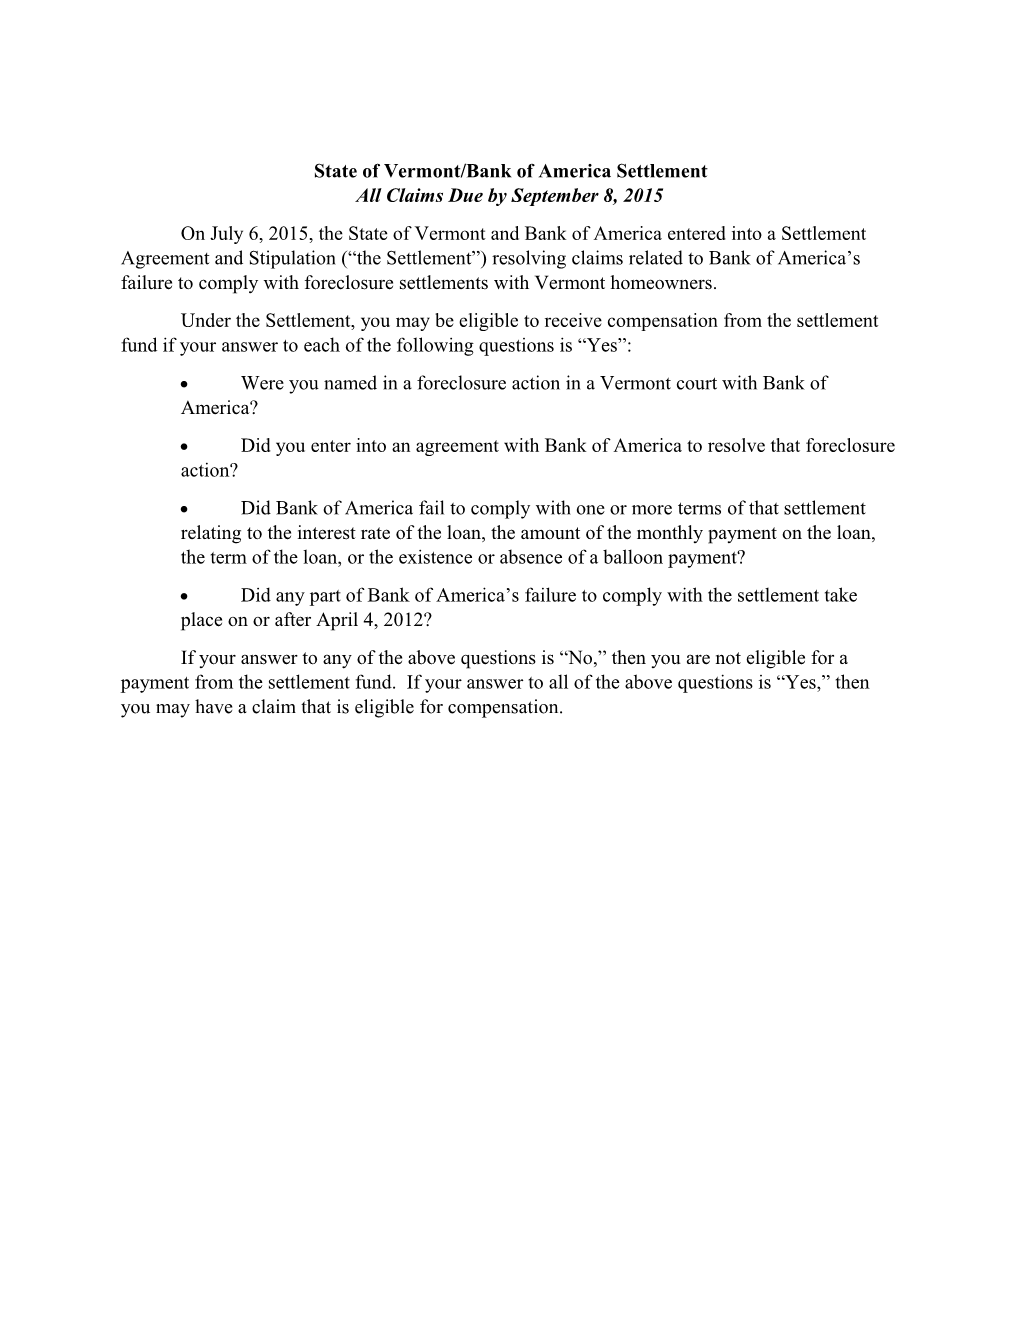 State of Vermont/Bank of America Settlement All Claims Due by September 8, 2015